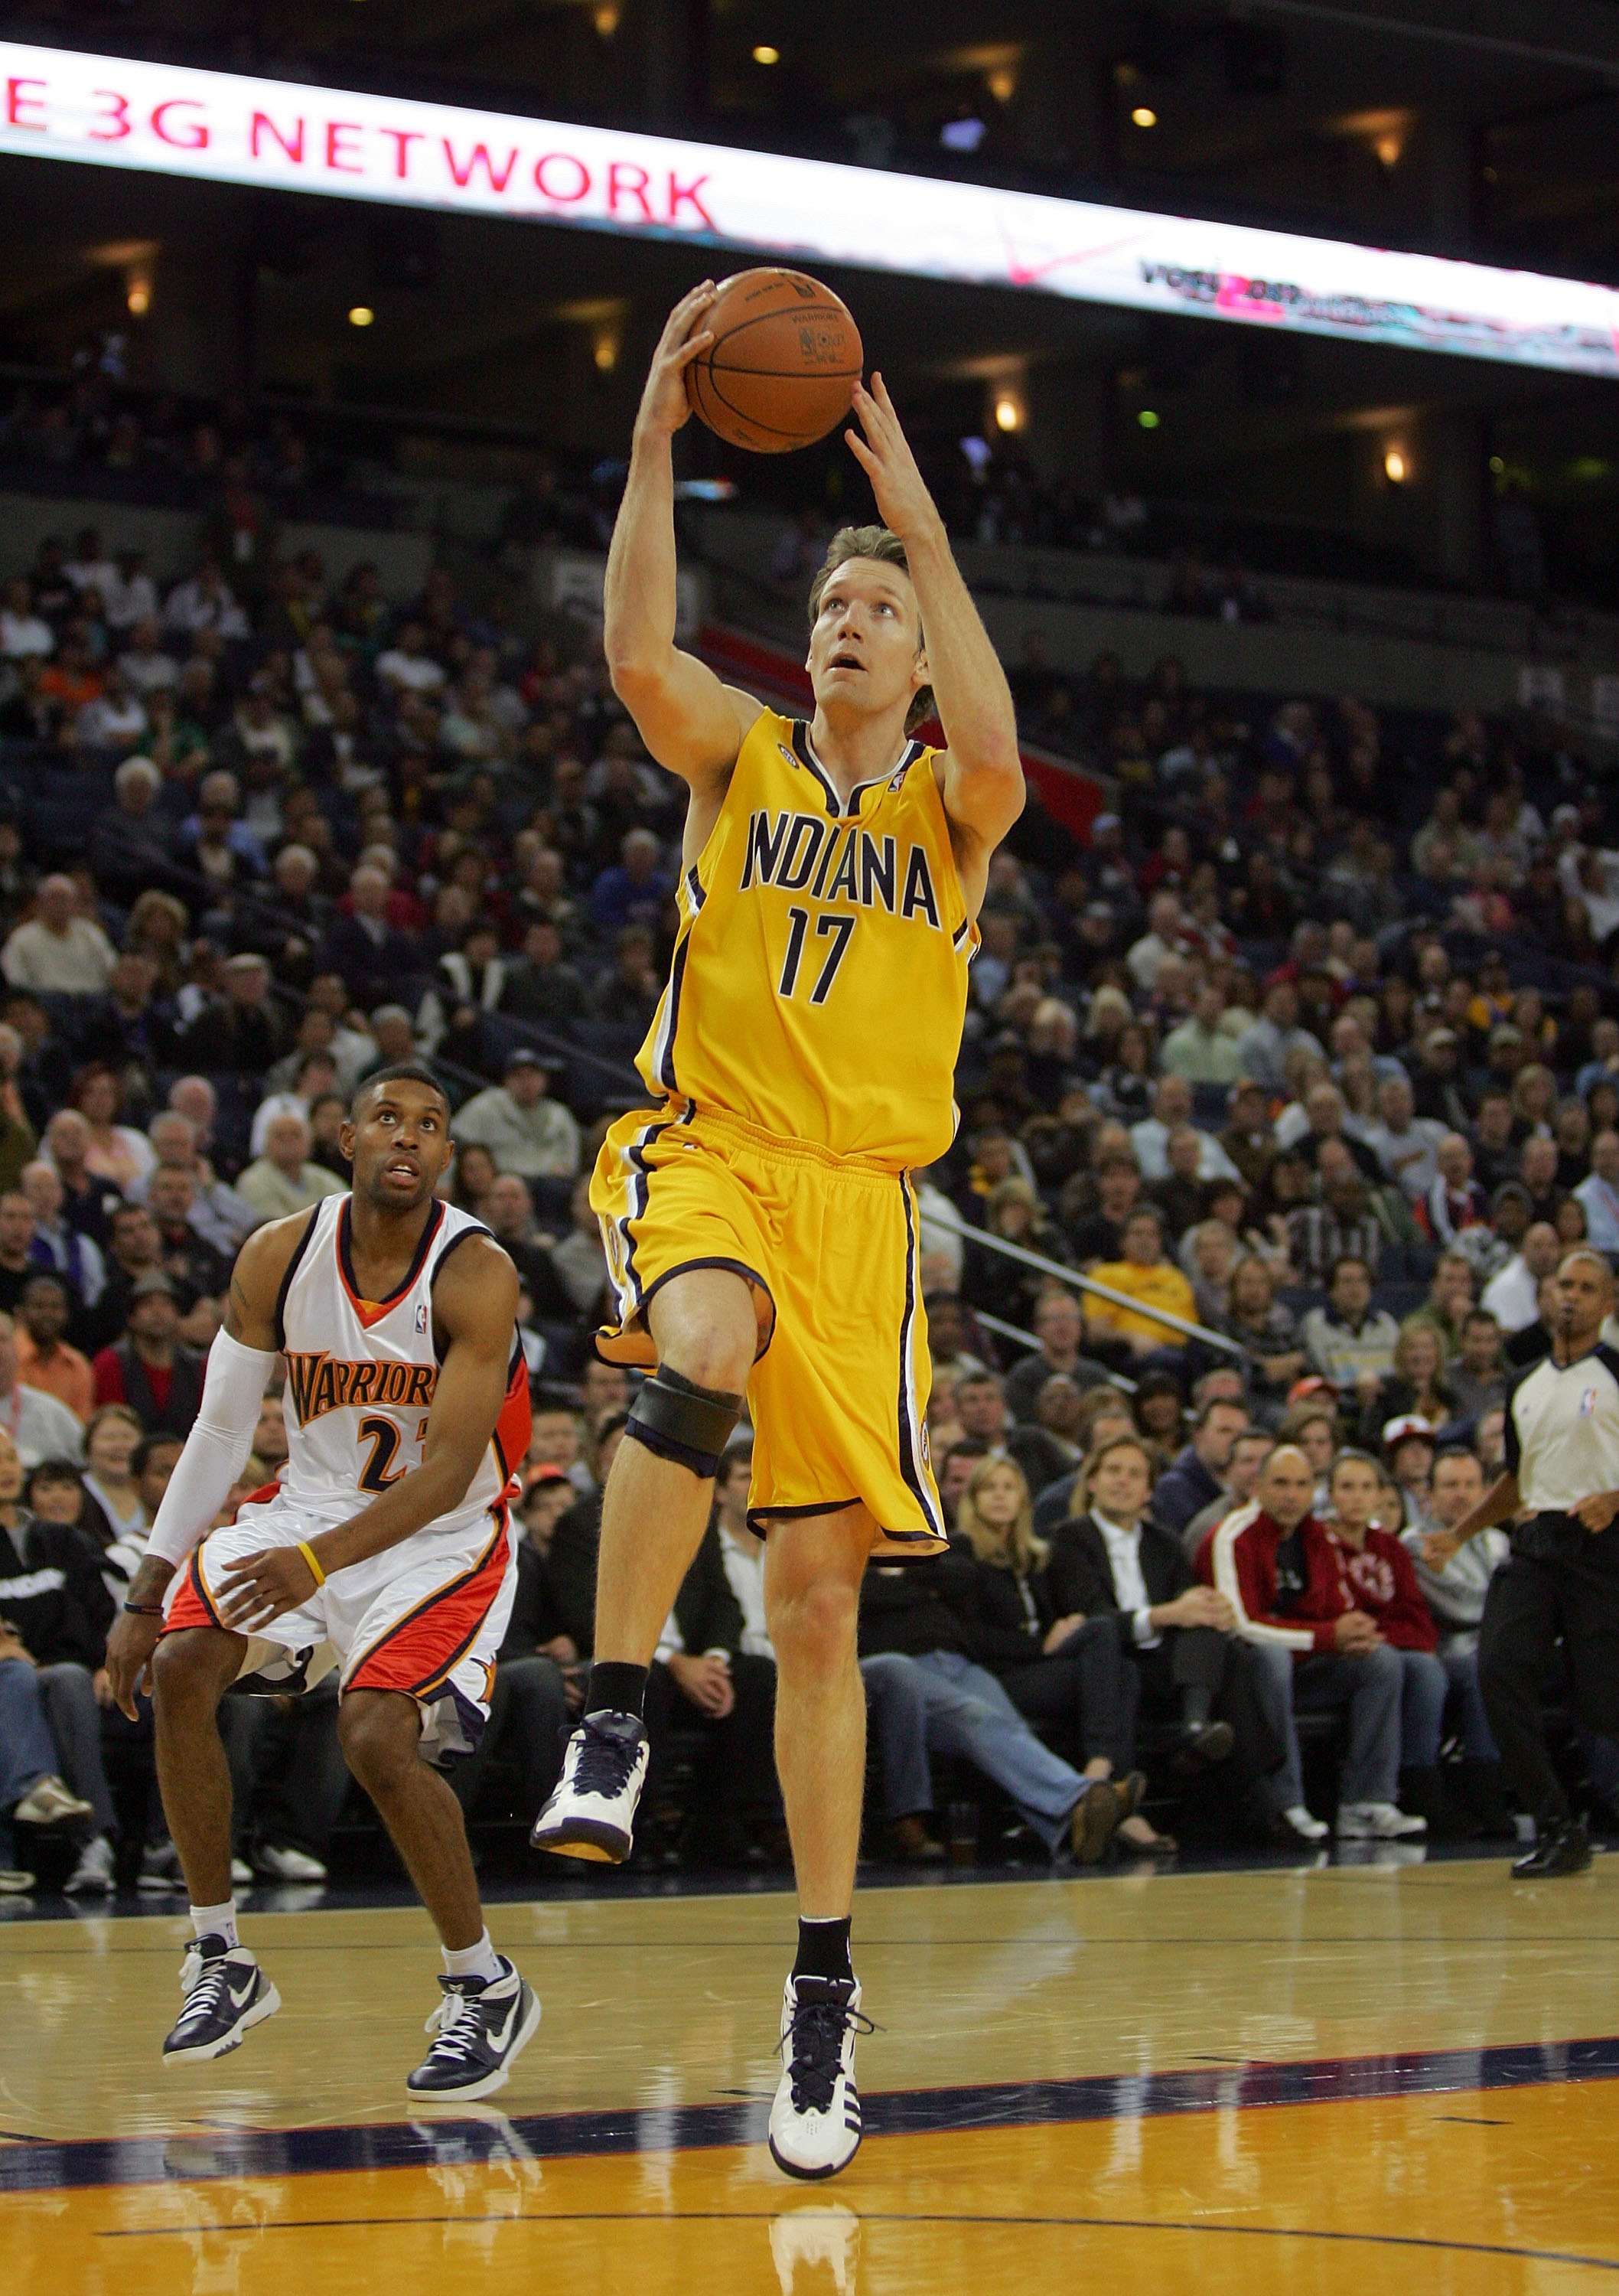 OAKLAND, CA - NOVEMBER 30:  Mike Dunleavy #17 of the Indiana Pacers in action during their game against the Golden State Warriors at Oracle Arena on November 30, 2009 in Oakland, California. NOTE TO USER: User expressly acknowledges and agrees that, by do